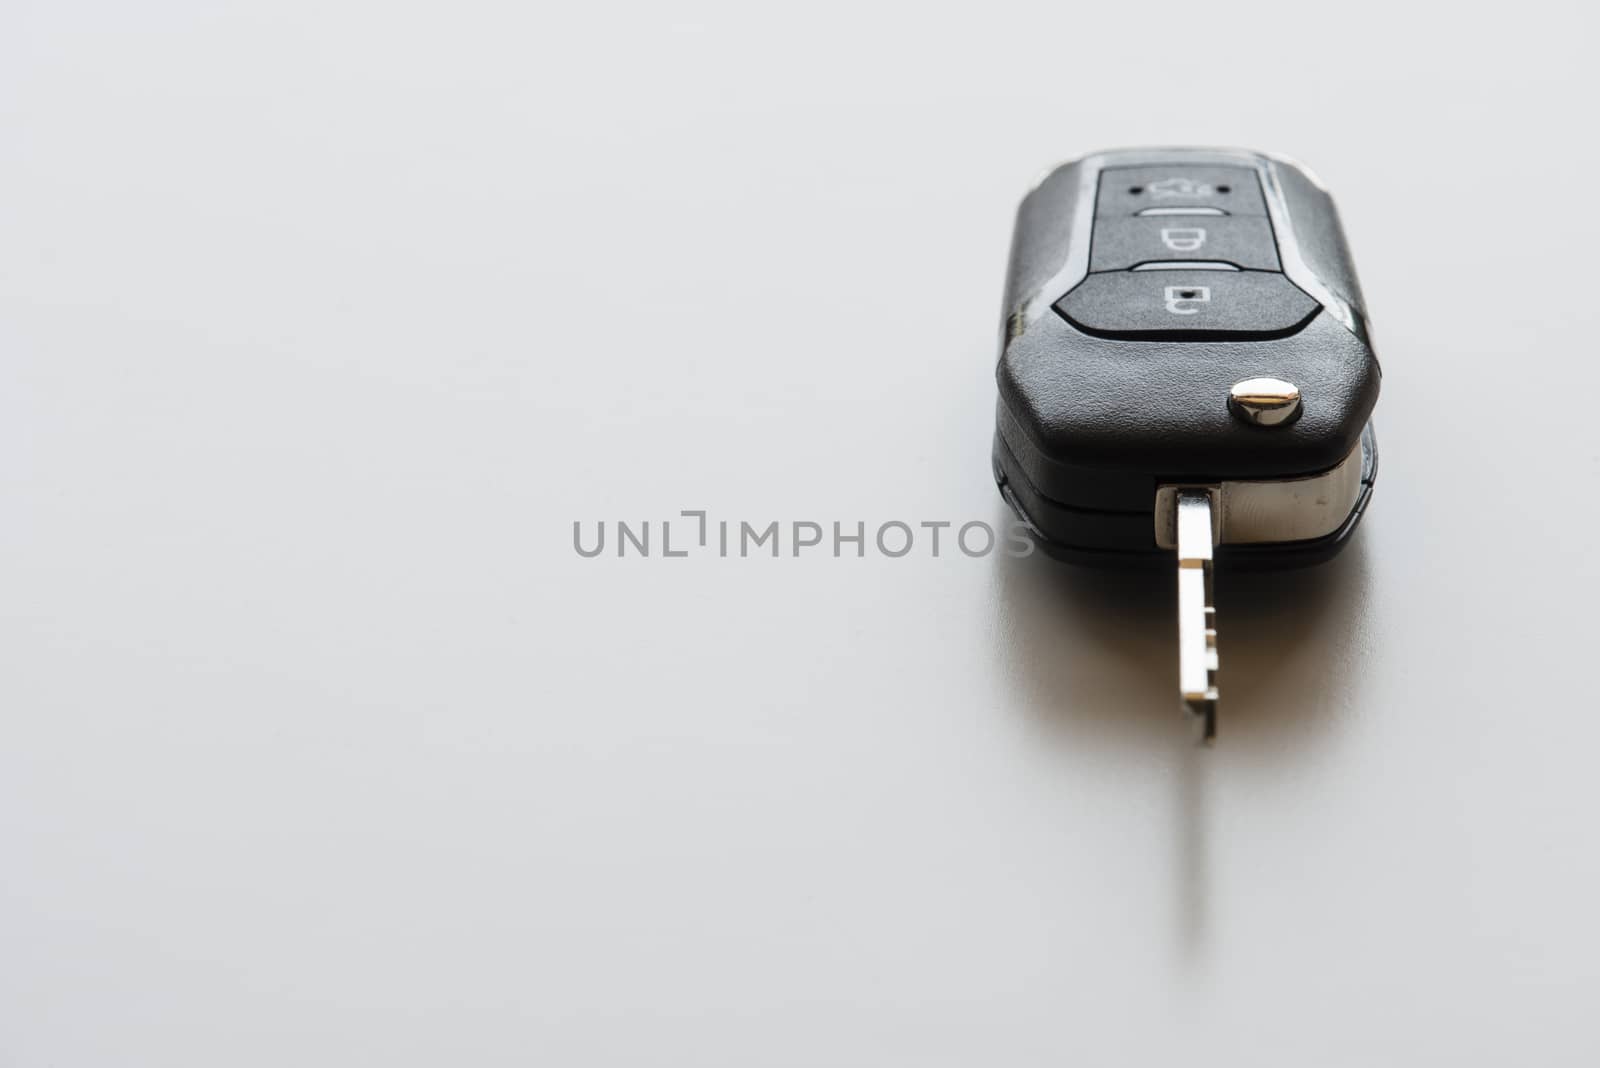 Close up of Remote electronic car key with mechanical second opening on white background.